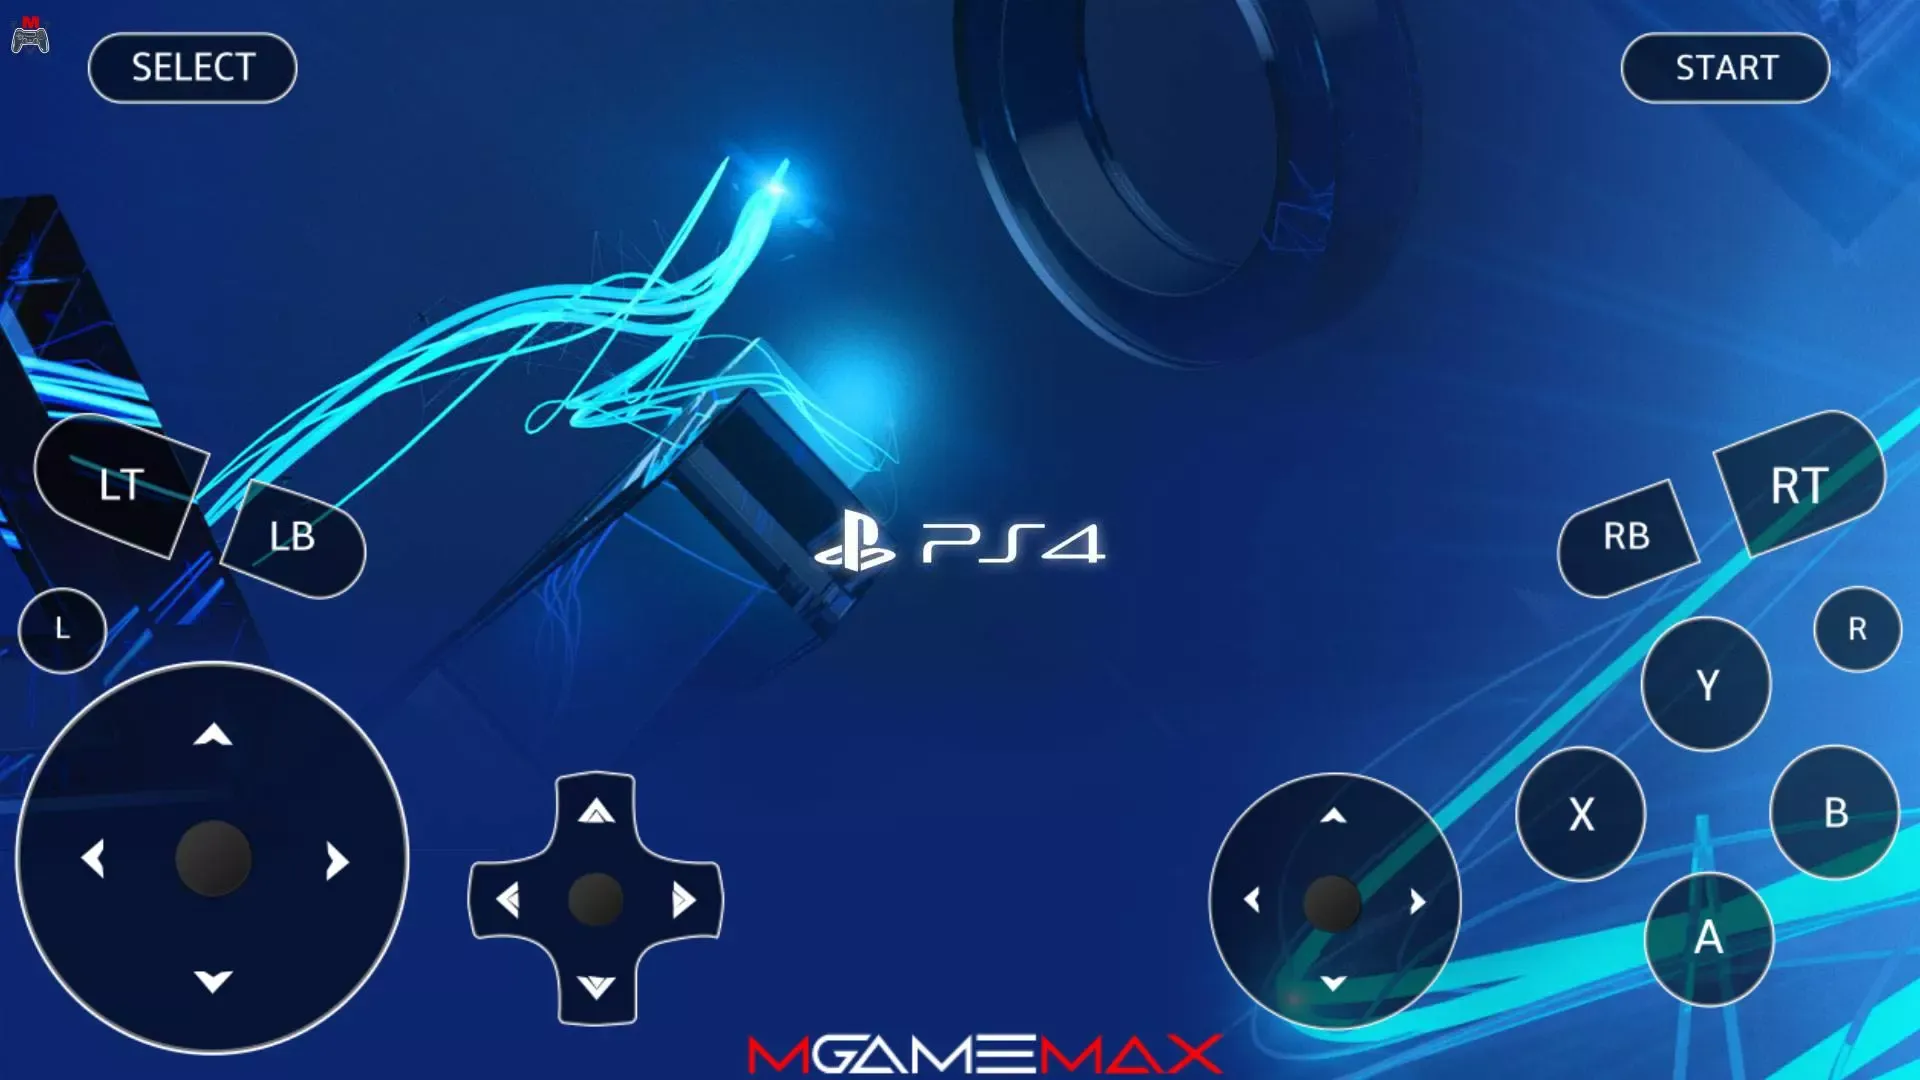 [42MB] DOWNLOAD 5G PS4 EMULATOR FOR ANDROID FOR FREE